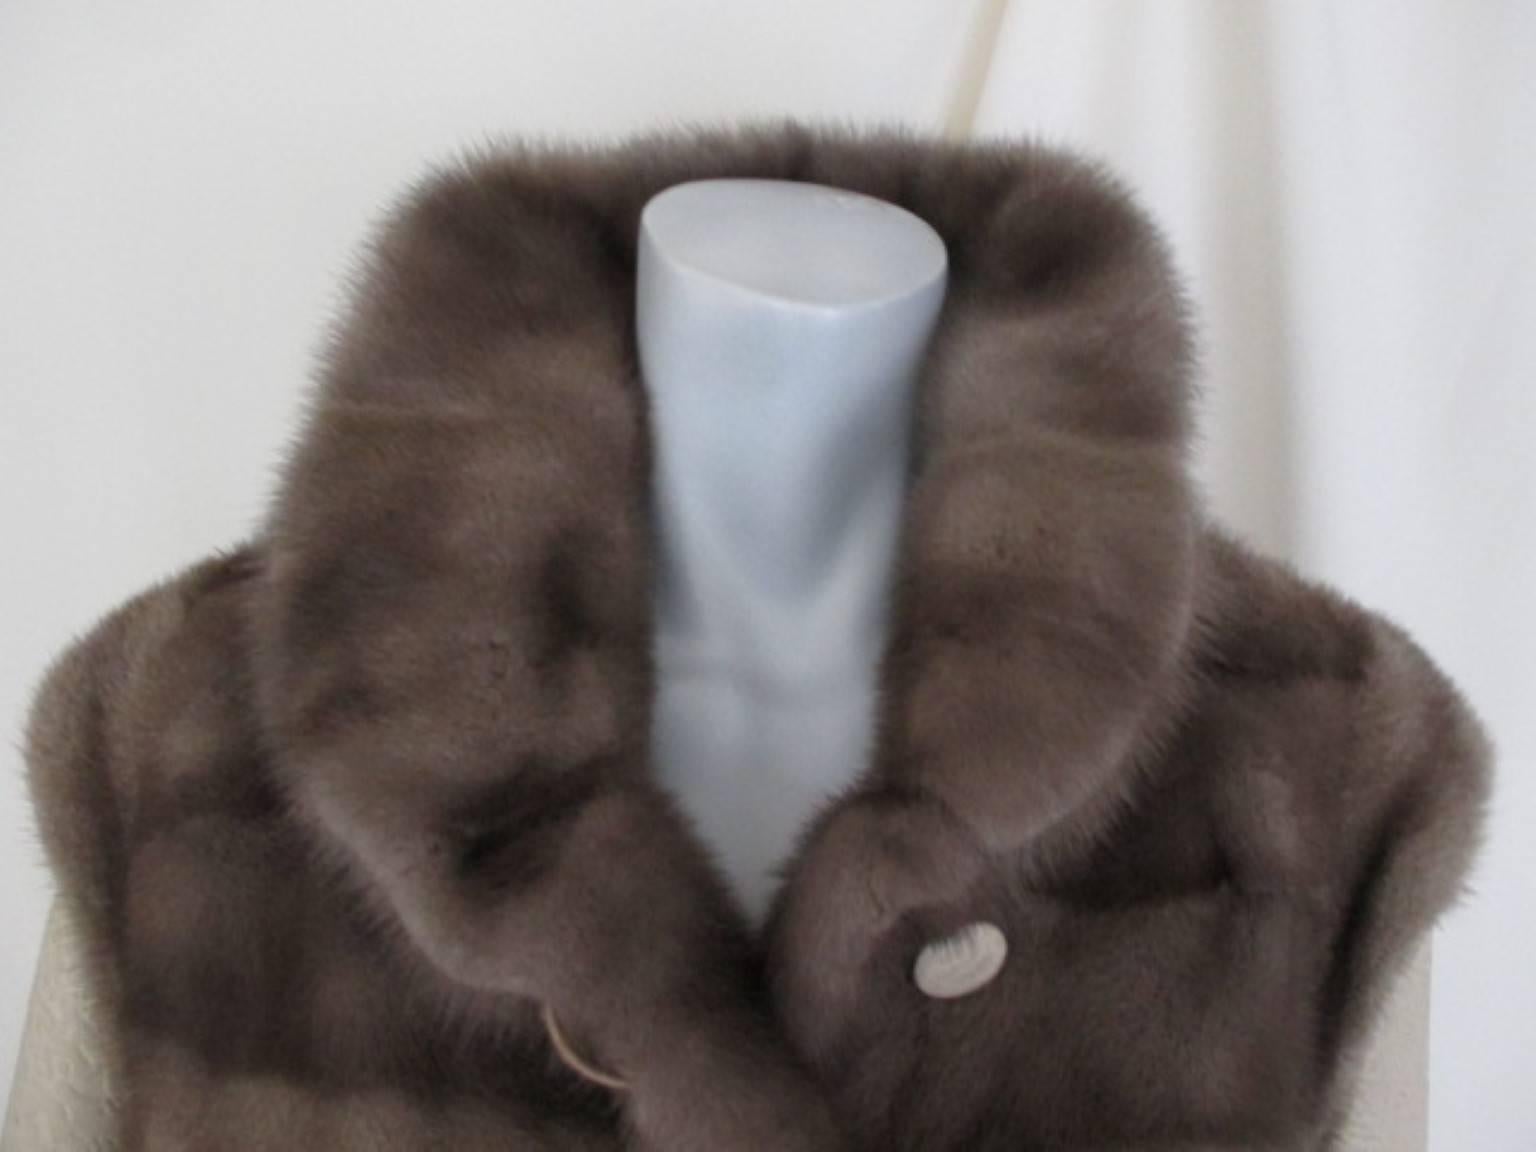 This coat is made of very soft quality blue iris mink and has printed leather sleeves and buttons.

We offer more luxurious fur items, view our frontstore.

Details:
Blue Iris Mink describes the darkest shade of the grey mink with pale underwool.